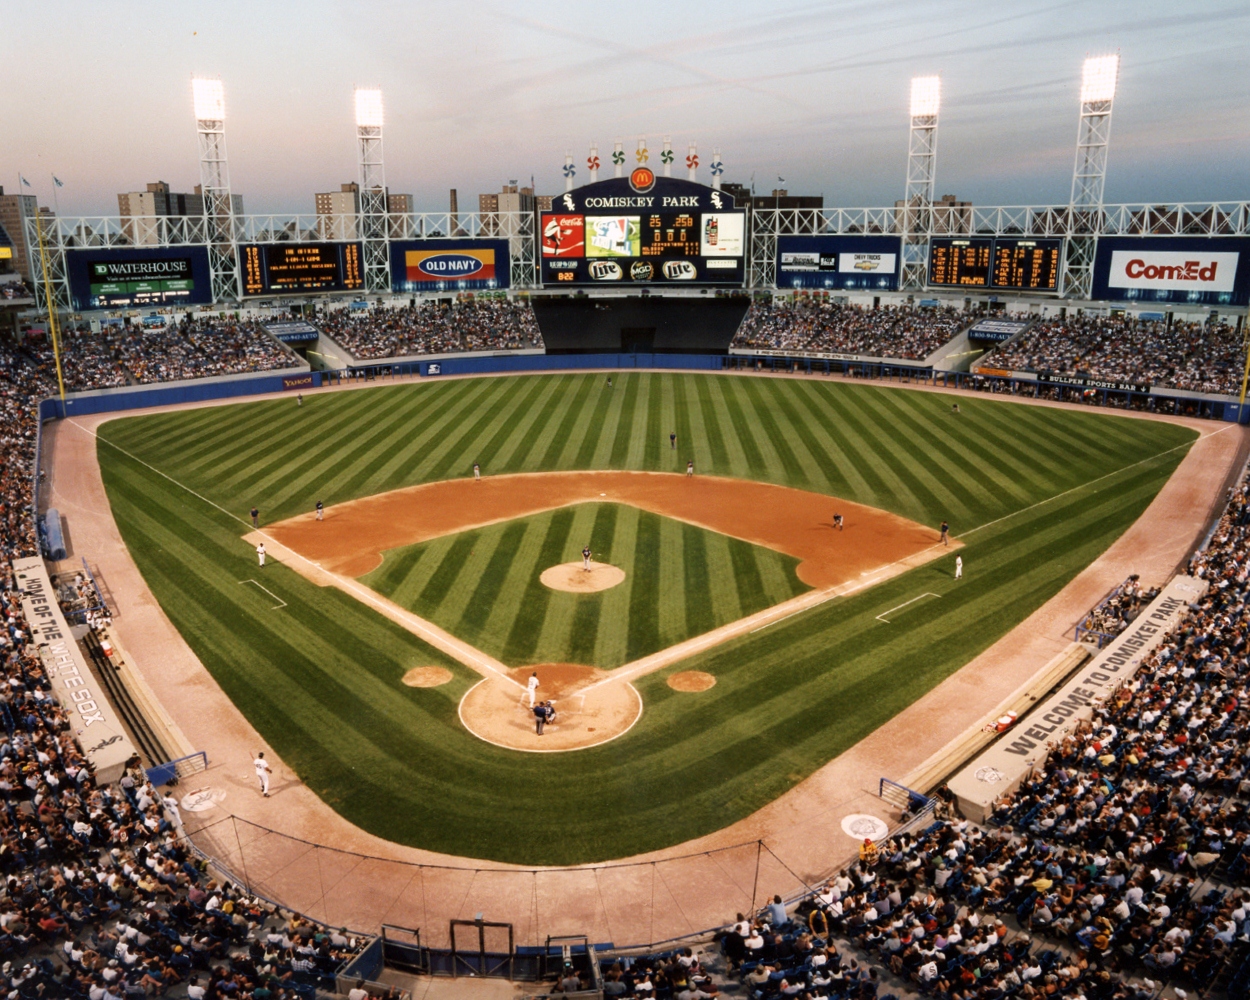 Picture Of Comiskey Park Home Of The White Sox - Comiskey Park - HD Wallpaper 